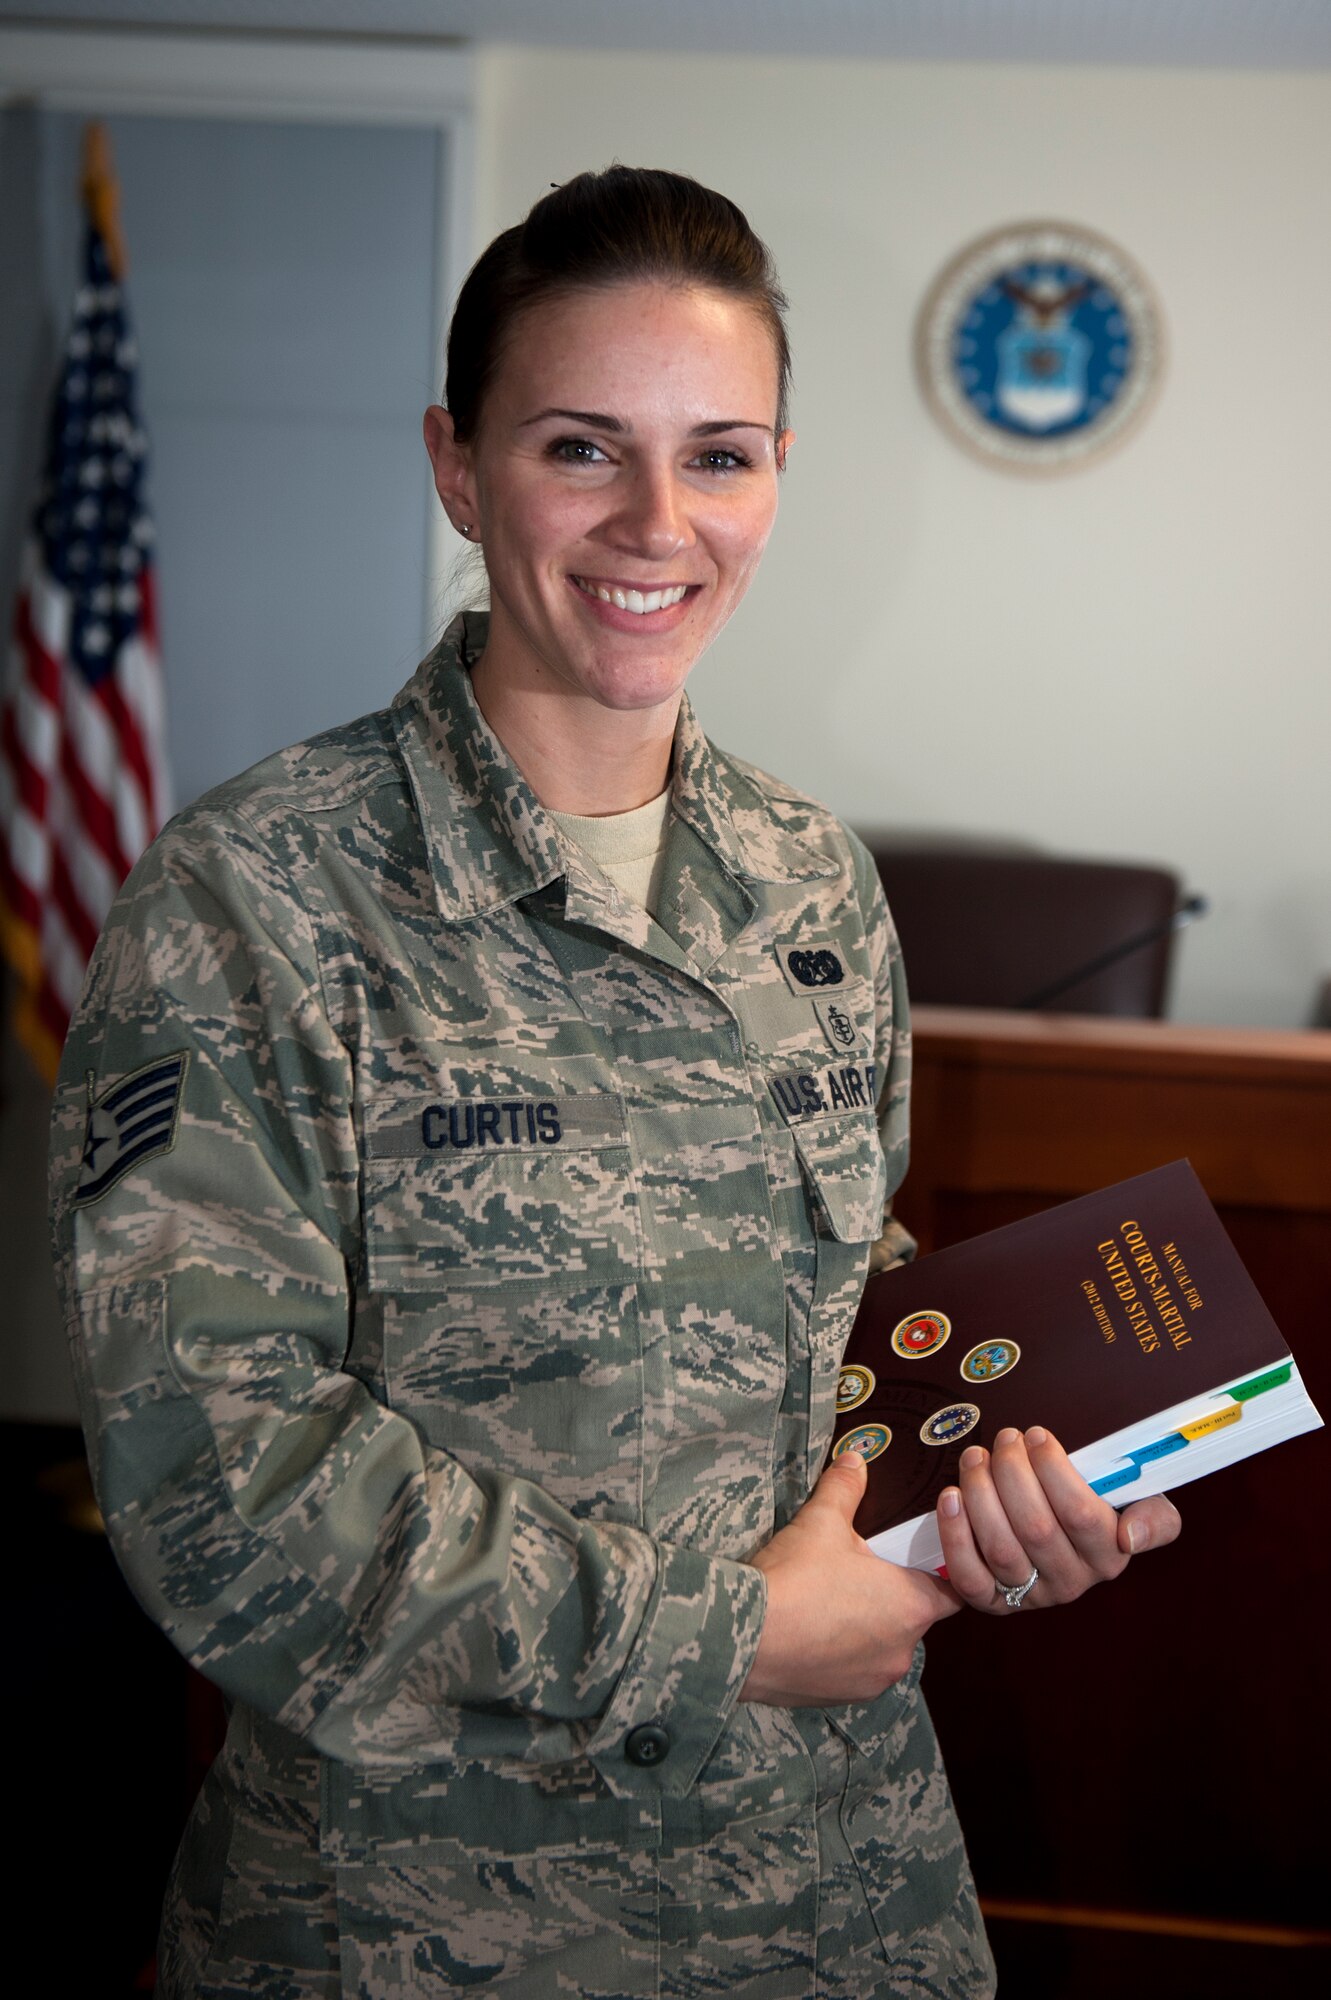 SPANGDAHLEM AIR BASE, Germany -- Staff Sgt. Charlotte Curtis, 52nd Fighter Wing legal office general law paralegal, is the Super Saber Performer for the week of Sept. 27 - Oct. 3. (U.S. Air Force photo by Airman 1st Class Gustavo Castillo/Released)
